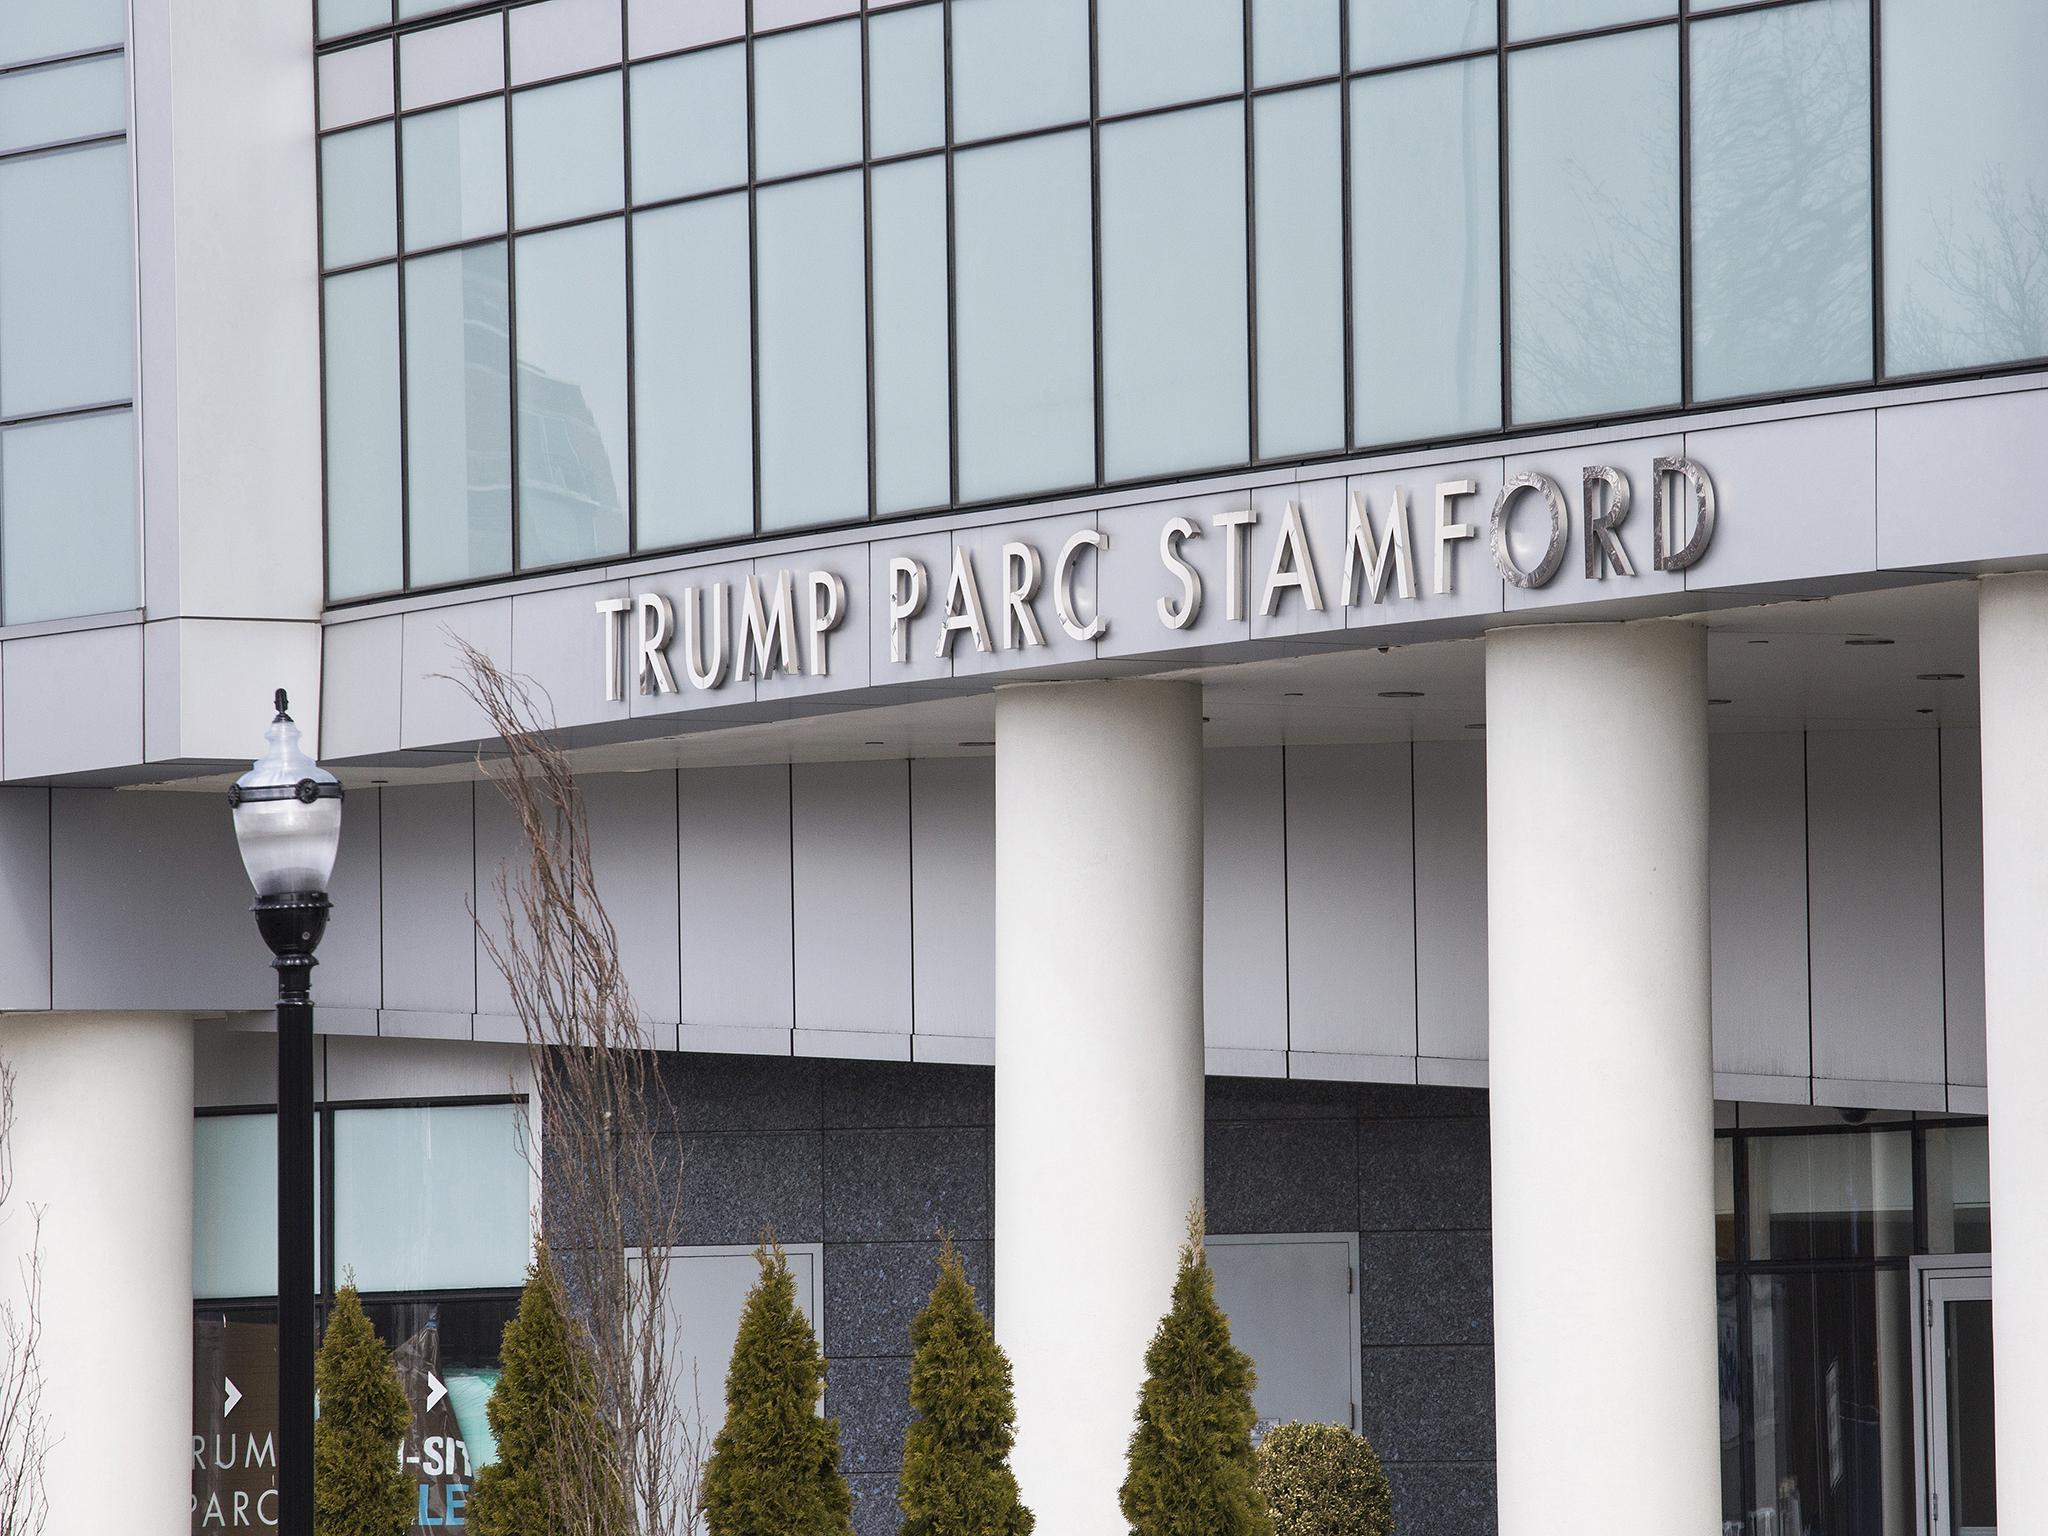 Sales have slowed at the Trump Parc in recent years, according to city records.